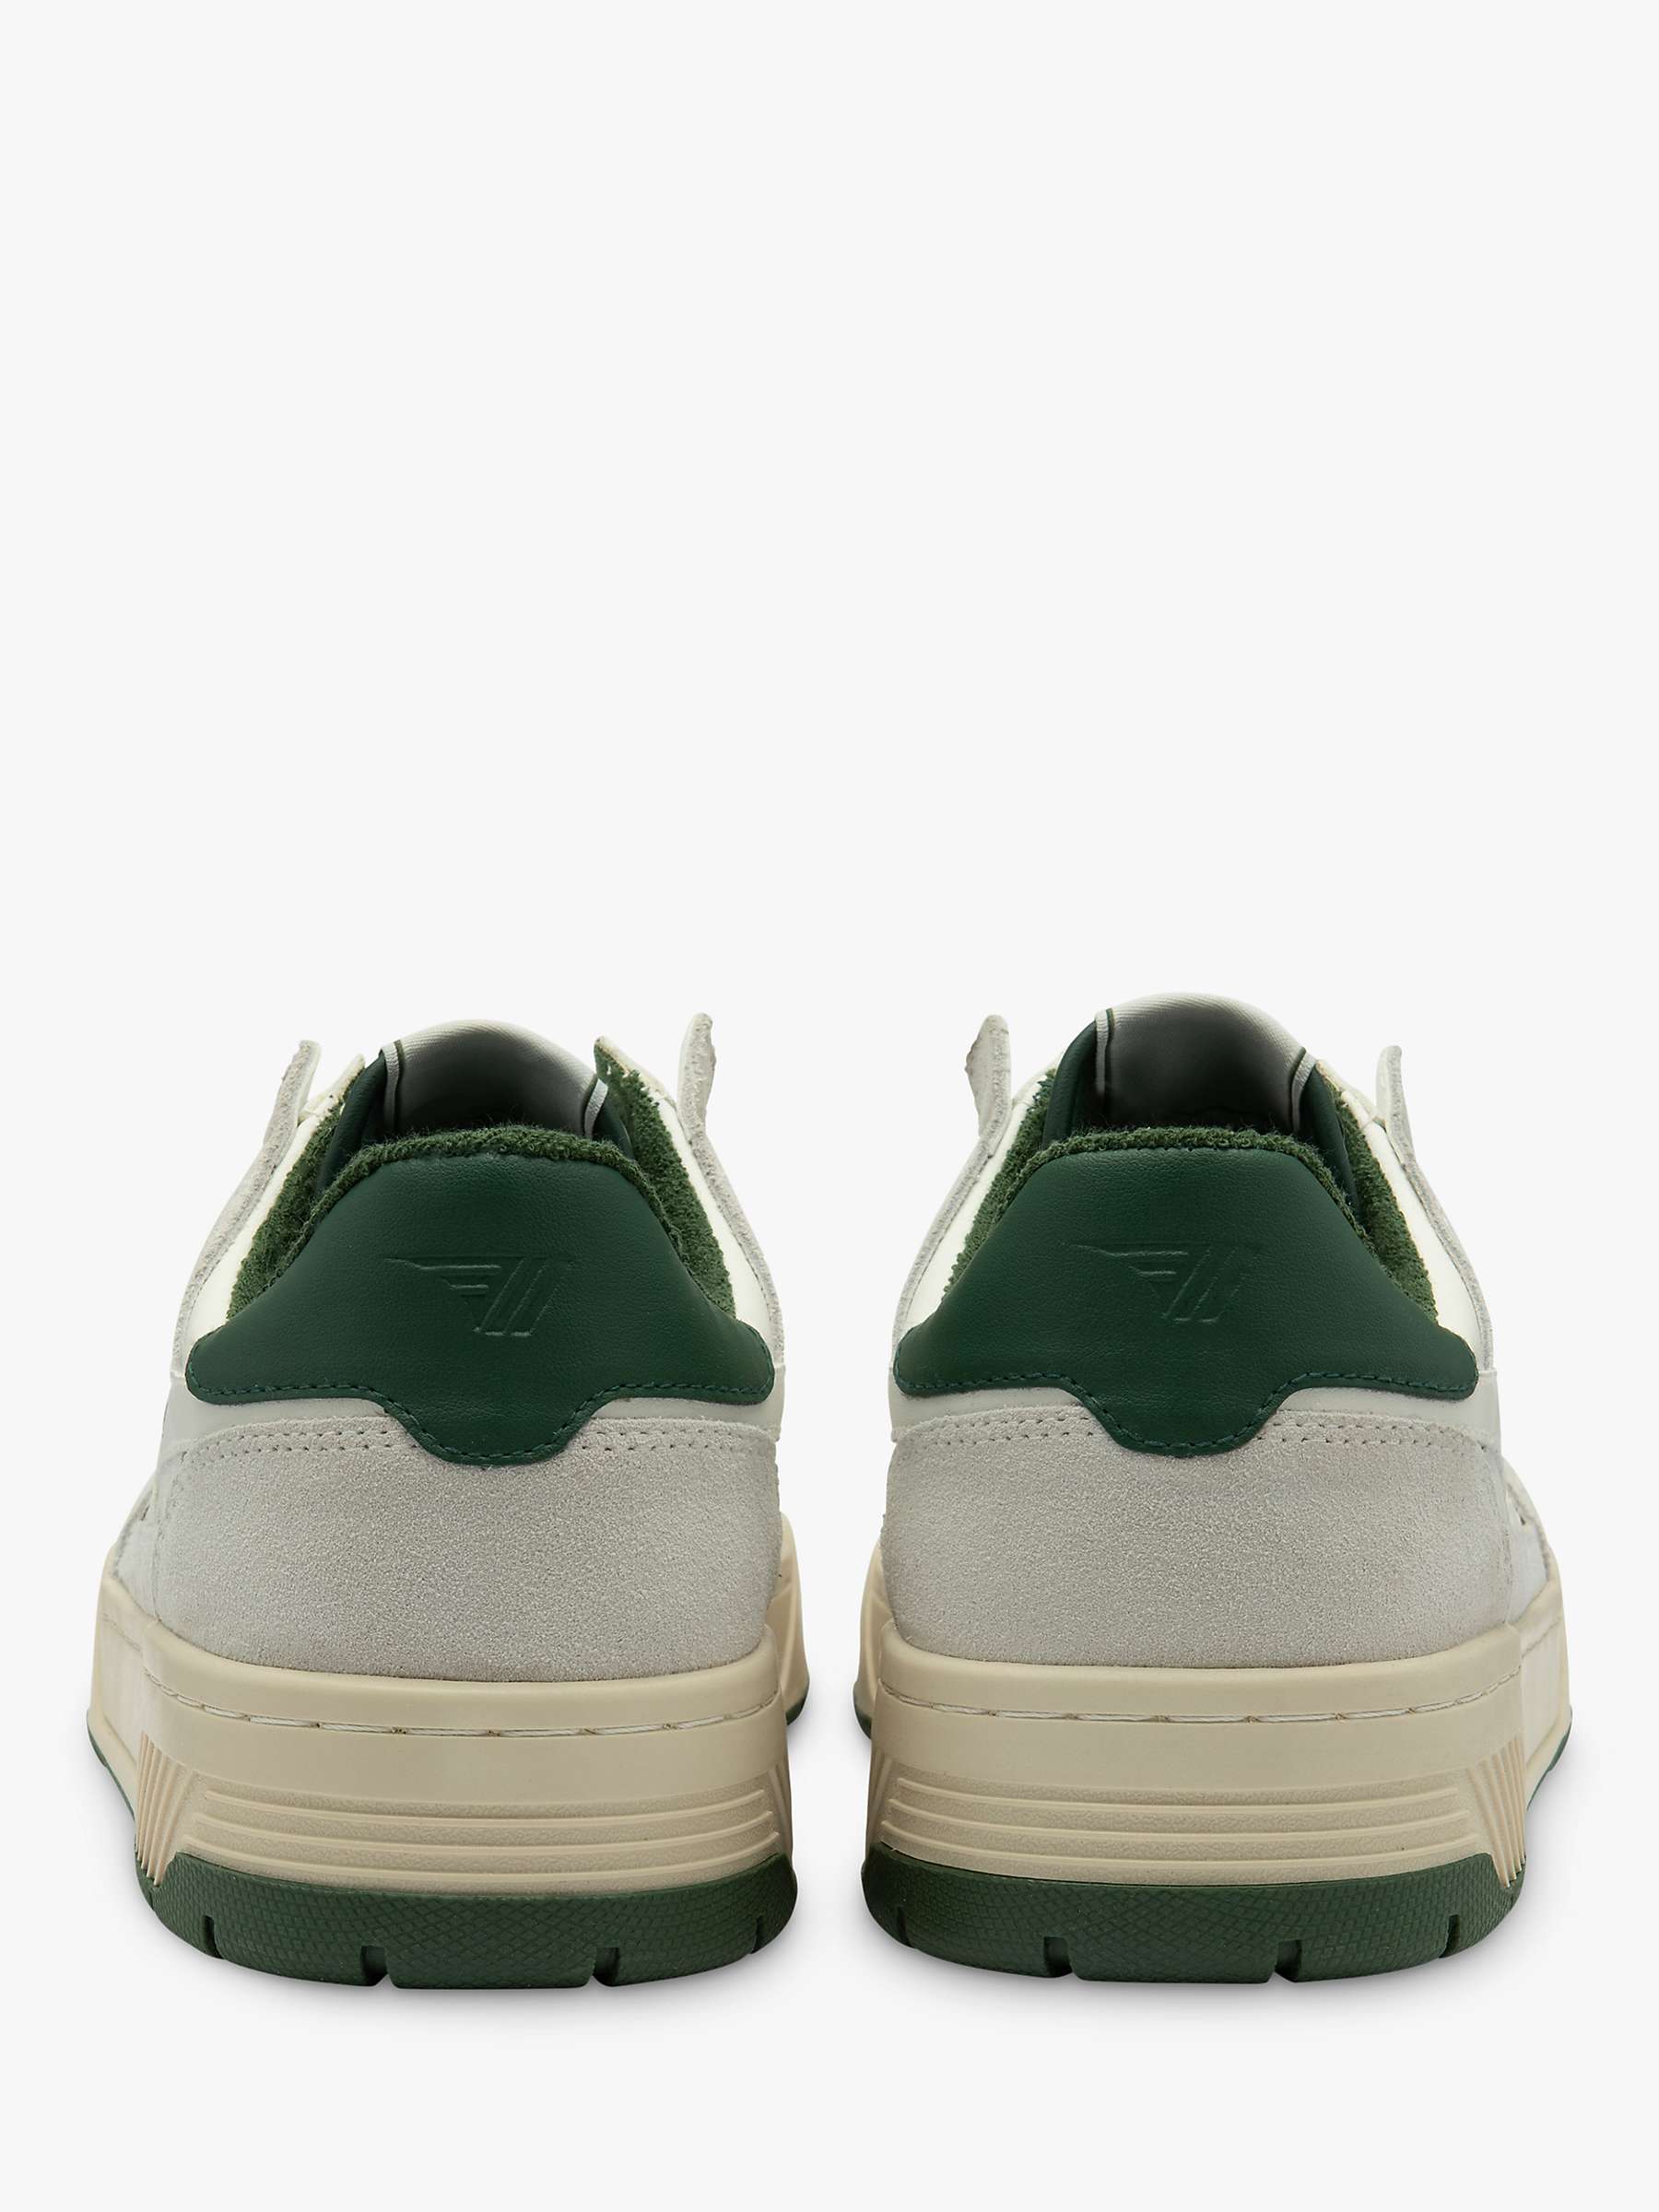 Buy Gola Classics Allcourt '86 Leather Trainers Online at johnlewis.com